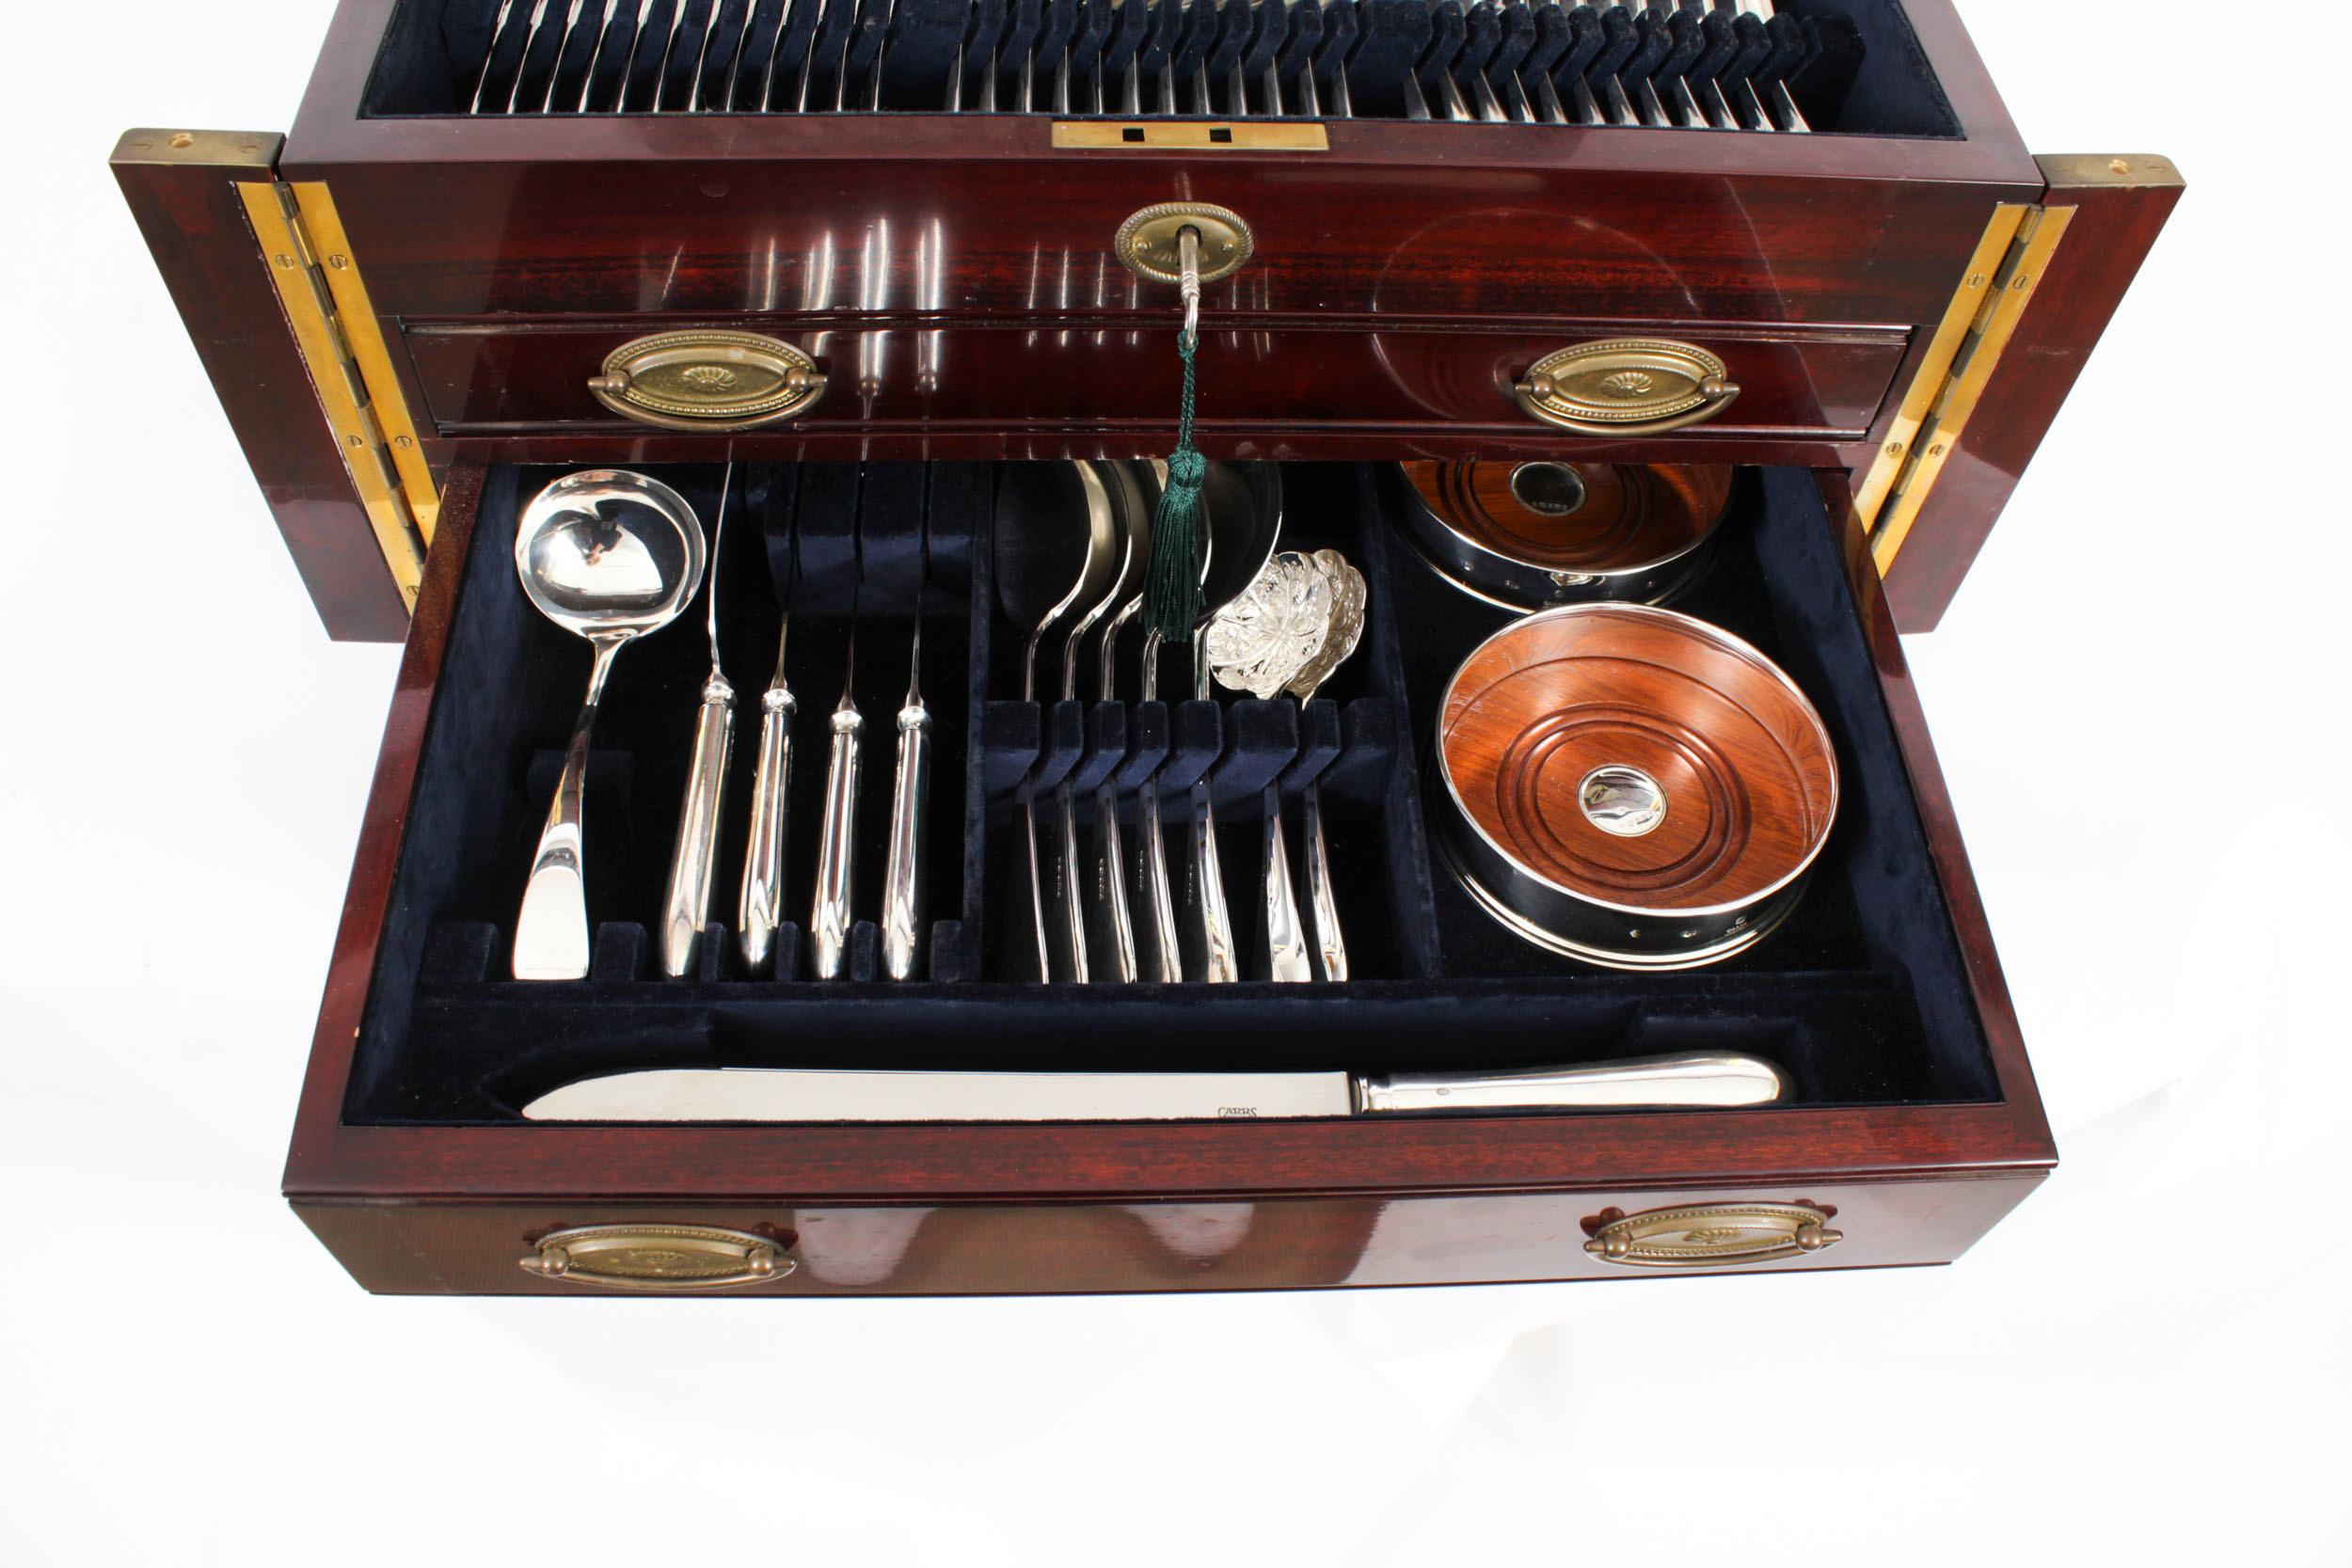 Vintage150 Piece Canteen-12 Place Sterling Silver Cutlery Set by Carrs 2004 For Sale 4